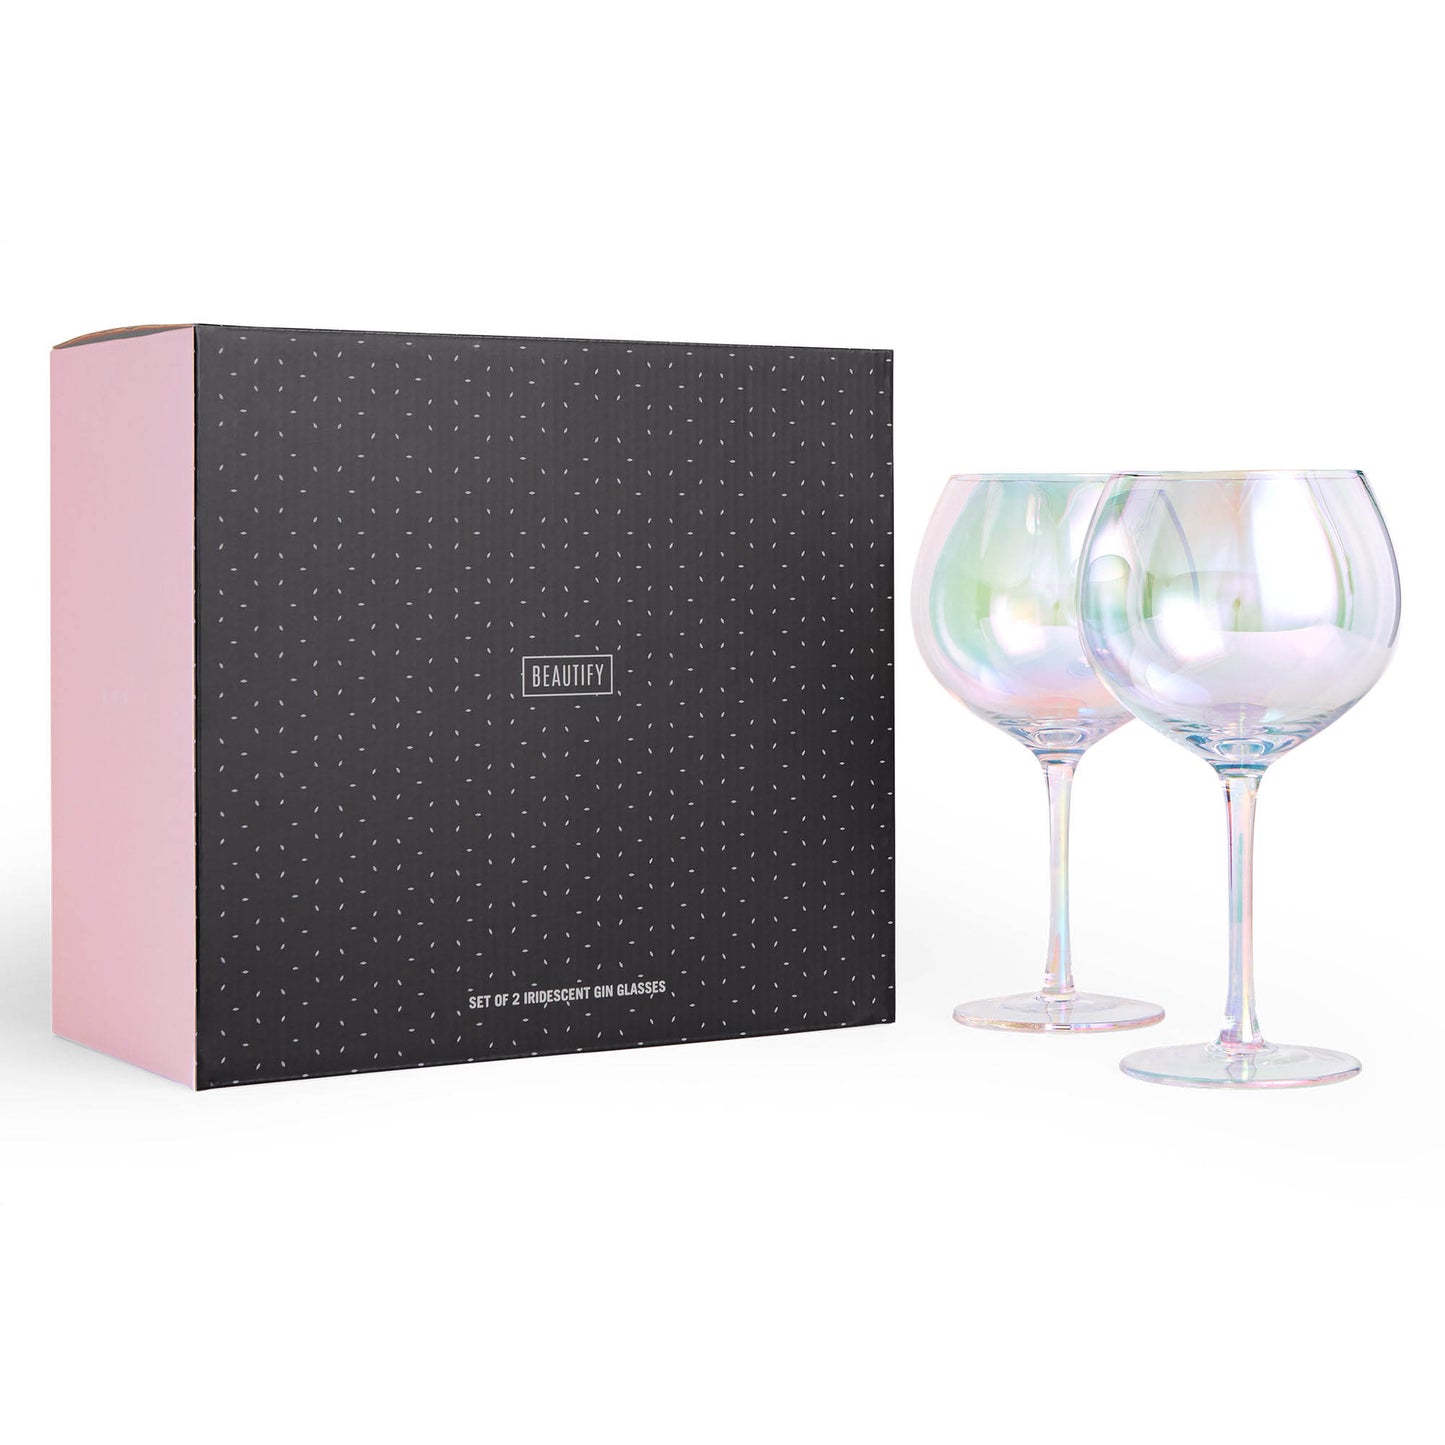 Iridescent Cocktail Gin Glass, Set of 2